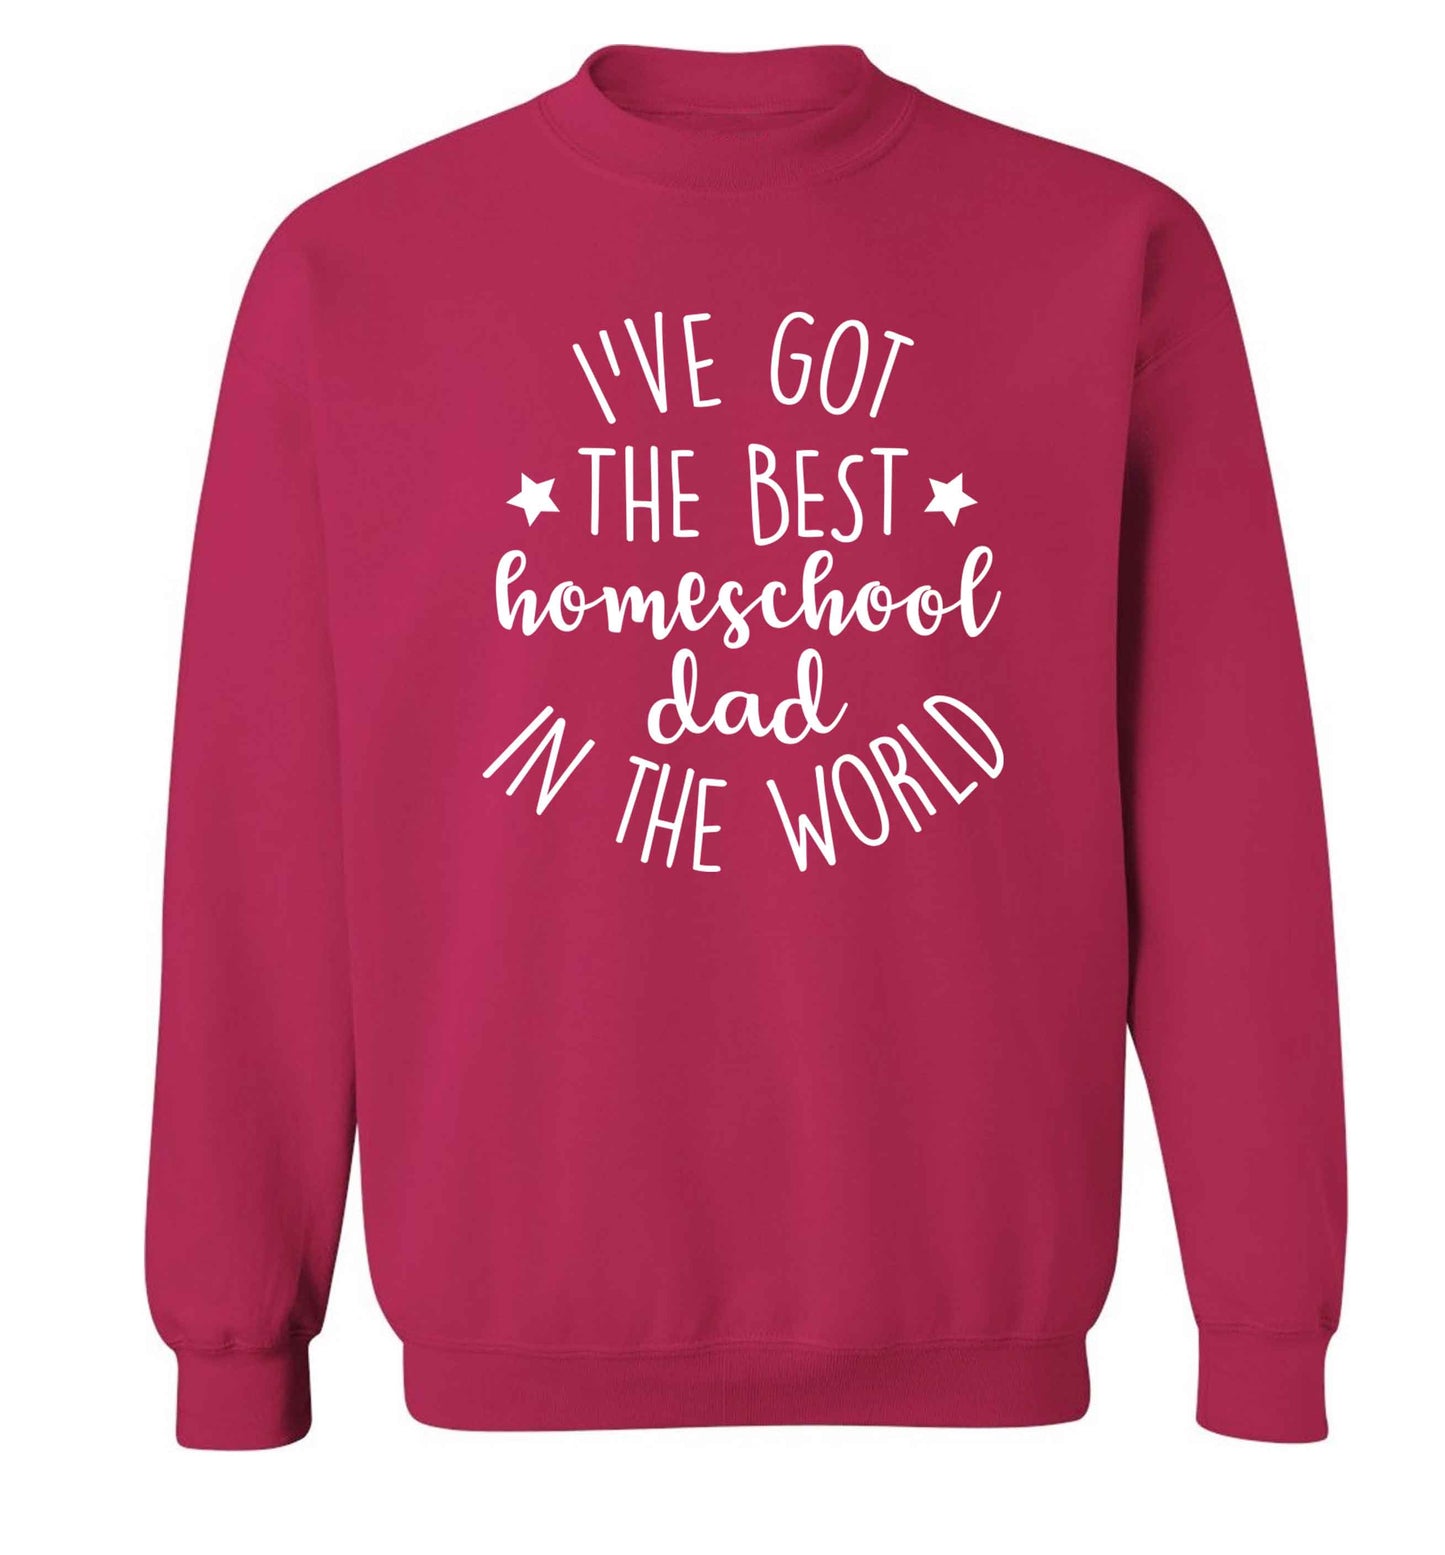 I've got the best homeschool dad in the world Adult's unisex pink Sweater 2XL